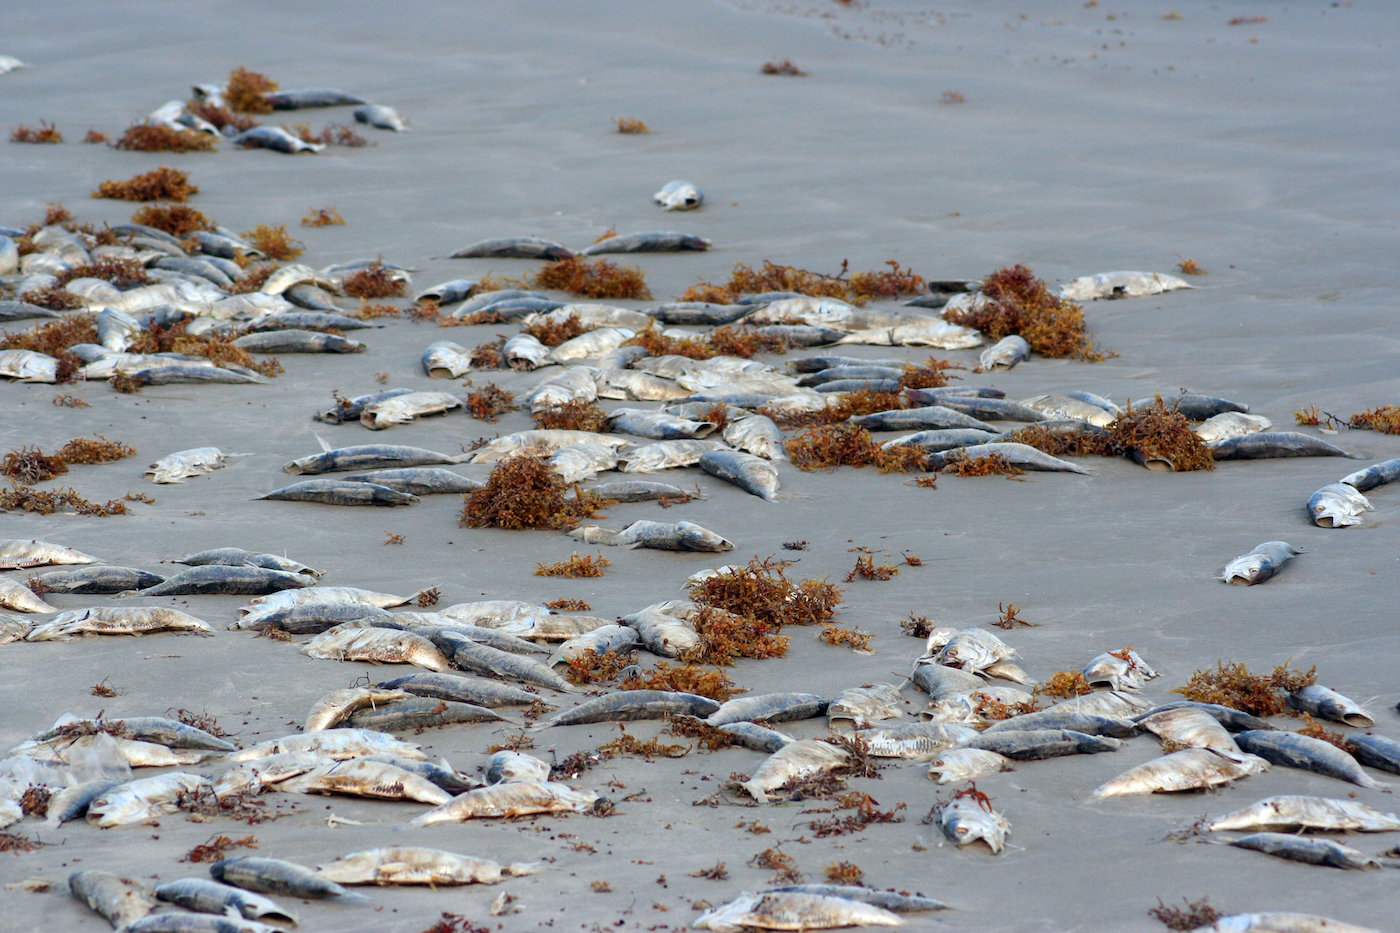 Dozens of dead silver fish piled on top of one another and side-by-side amongst read kelp on a beach. 